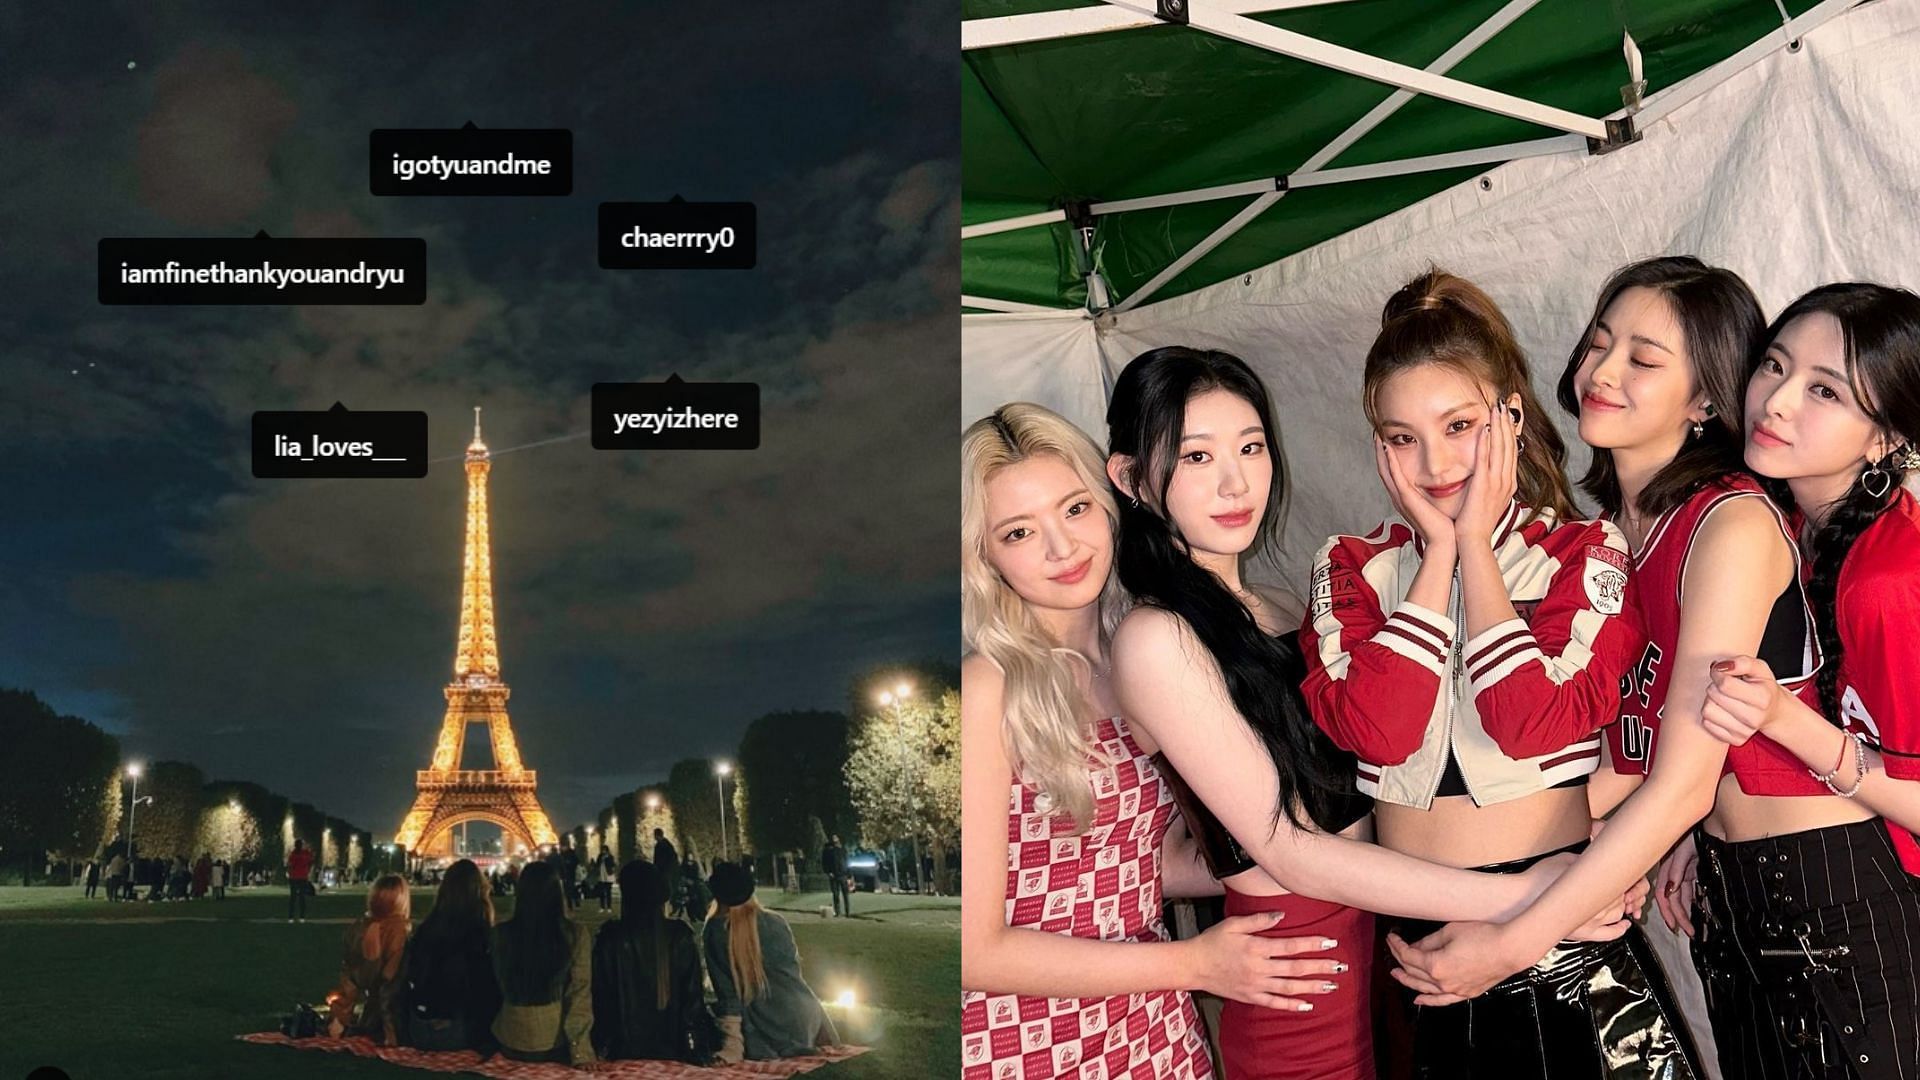 ITZY members announce their own Instagram handles! (Images via Instagram/itzy.all.in.us)